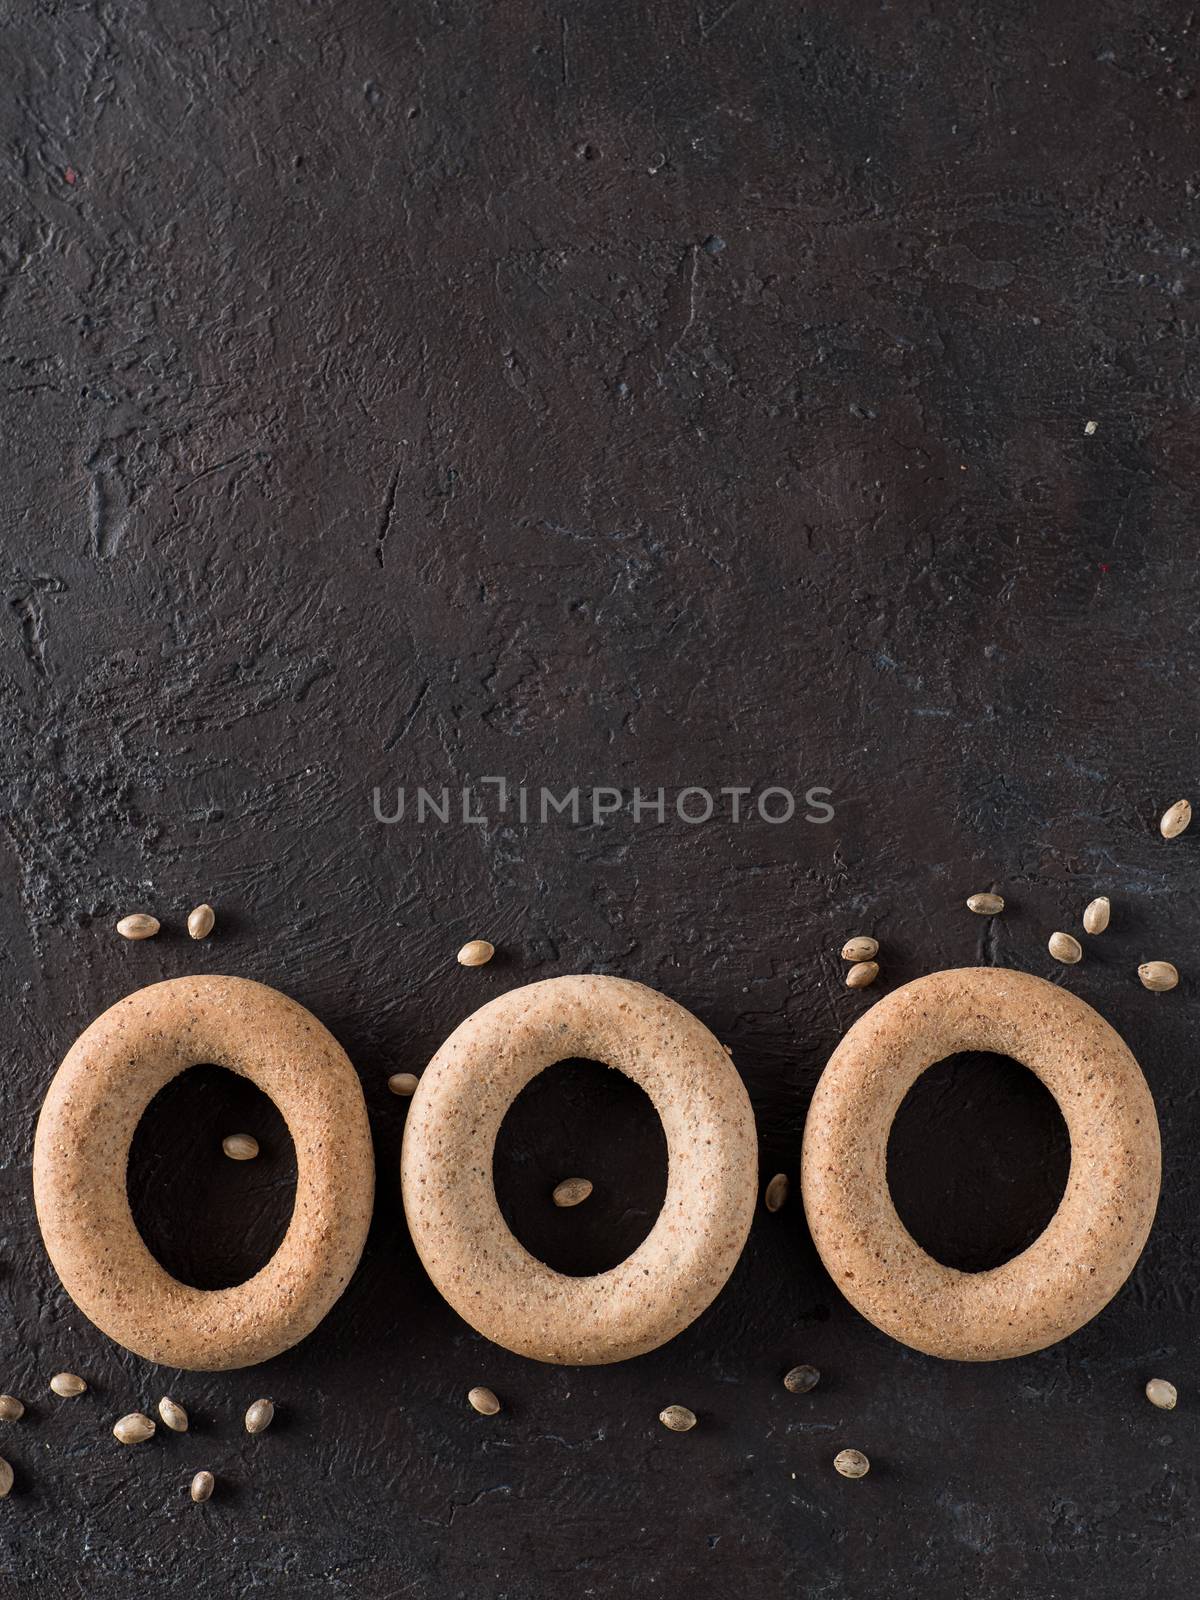 Ring-shaped cracknel with whole grain hemp flour by fascinadora